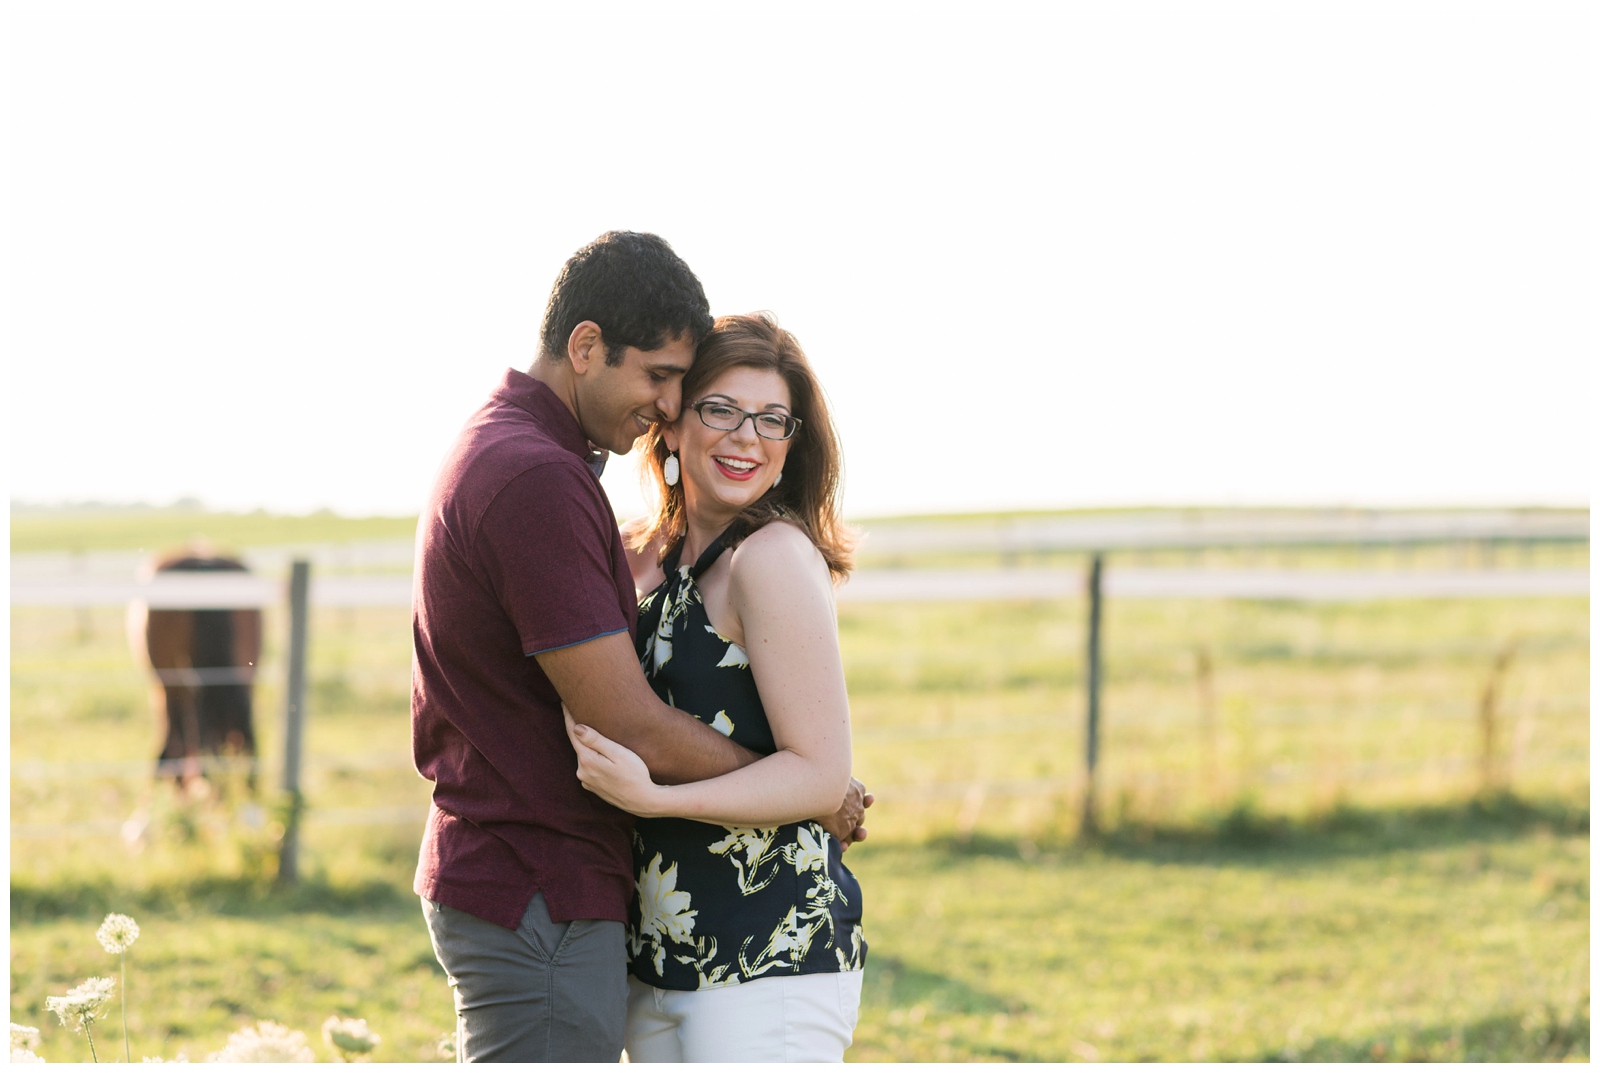 engagement portraits in horse field with casual outfits on bride and groom by Pipers Photography